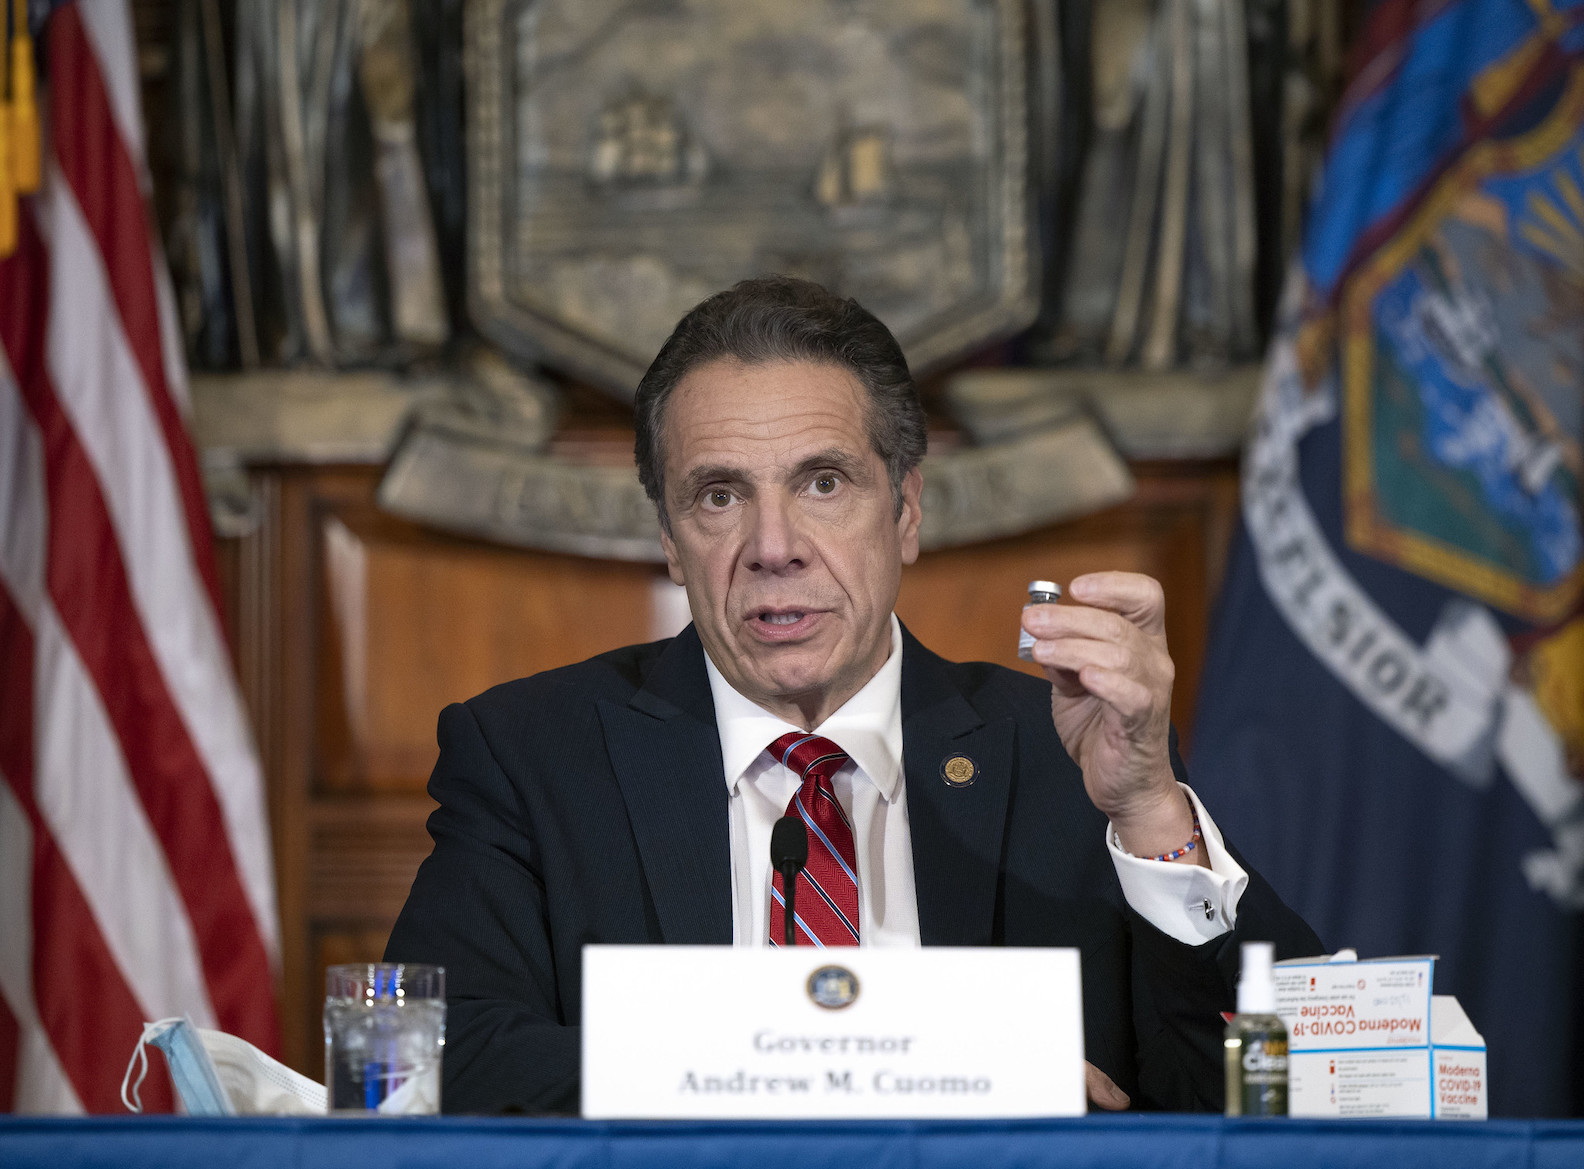 Gov. Andrew Cuomo, shown holding a Moderna COVID-19 vaccination vial during Wednesday's press conference, said plans are underway to try and allow Buffalo Bills fans to attend a home playoff game. (Image by (Mike Groll/Office of Gov. Andrew M. Cuomo)